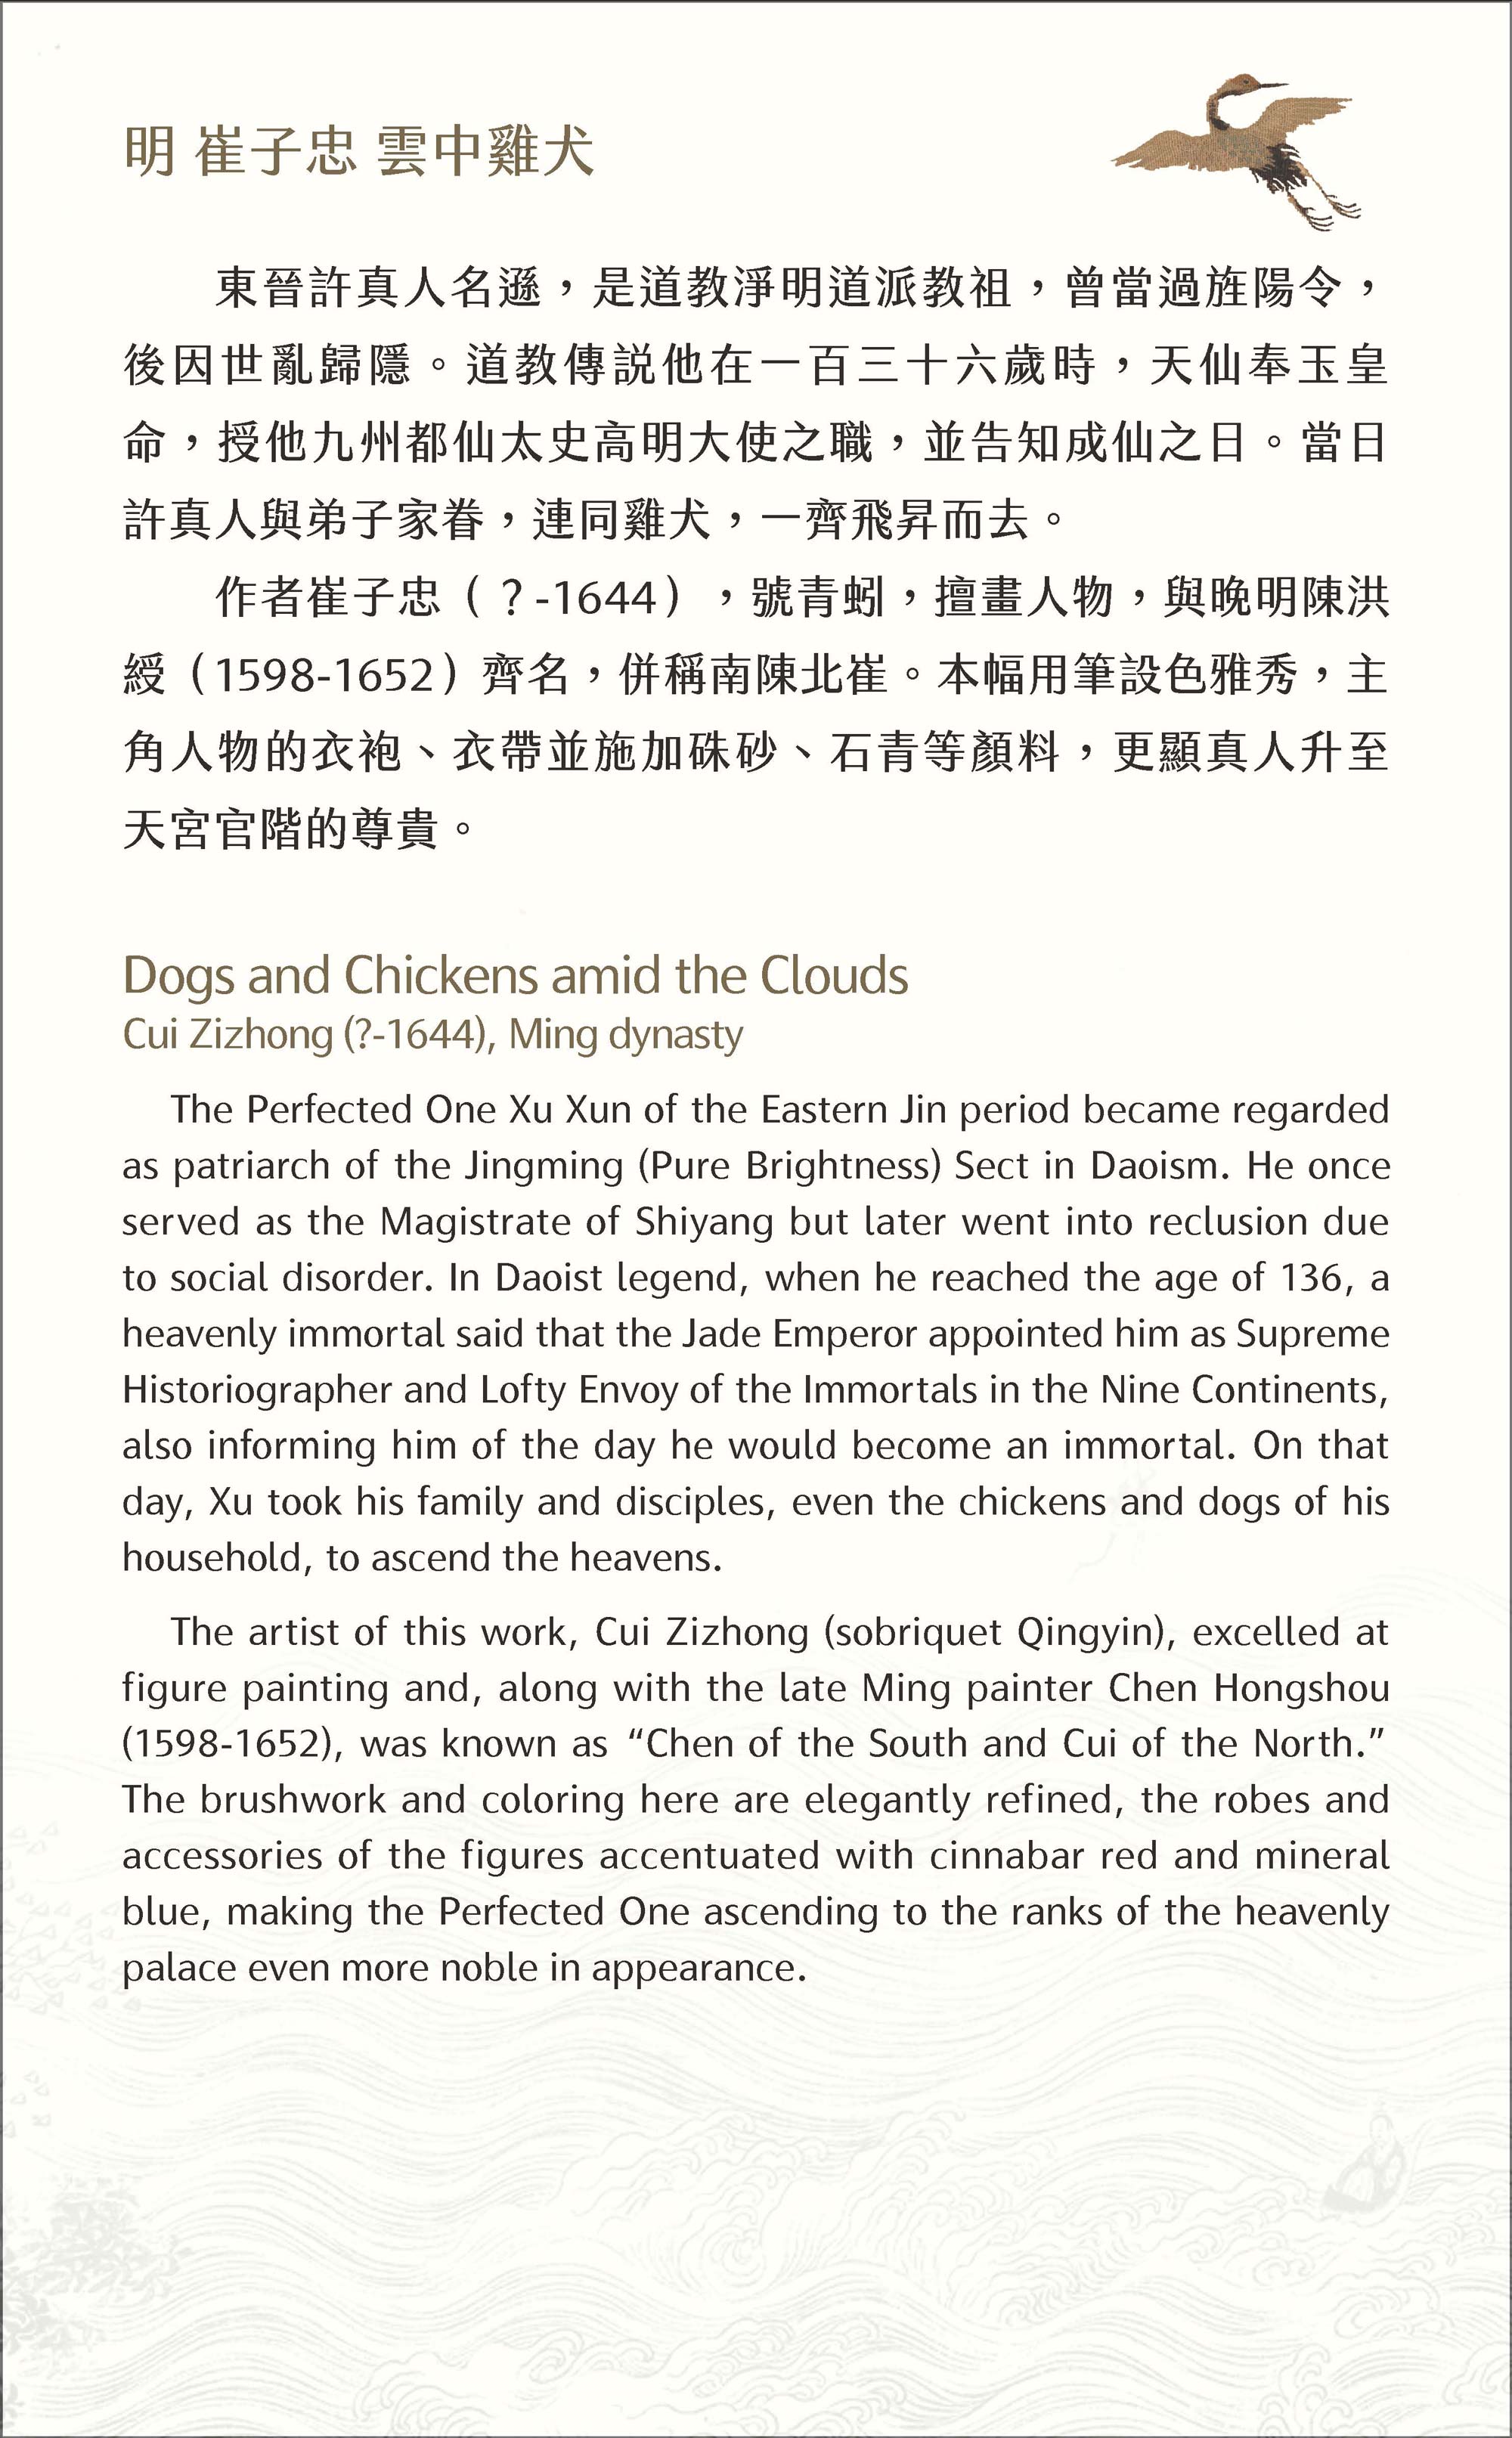 This explanatory card was prepared for the "Whereto Paradise: Picturing Mountains of Immortality in Chinese Art" special exhibition that opened in July of 2018. The contents were written by Assistant Researcher Hsu Wen-mei and translated into English by Donald E. Brix. Assistant Researcher Lin Tzu-yin of the Department of Education, Exhibition and Information Services designed the card.